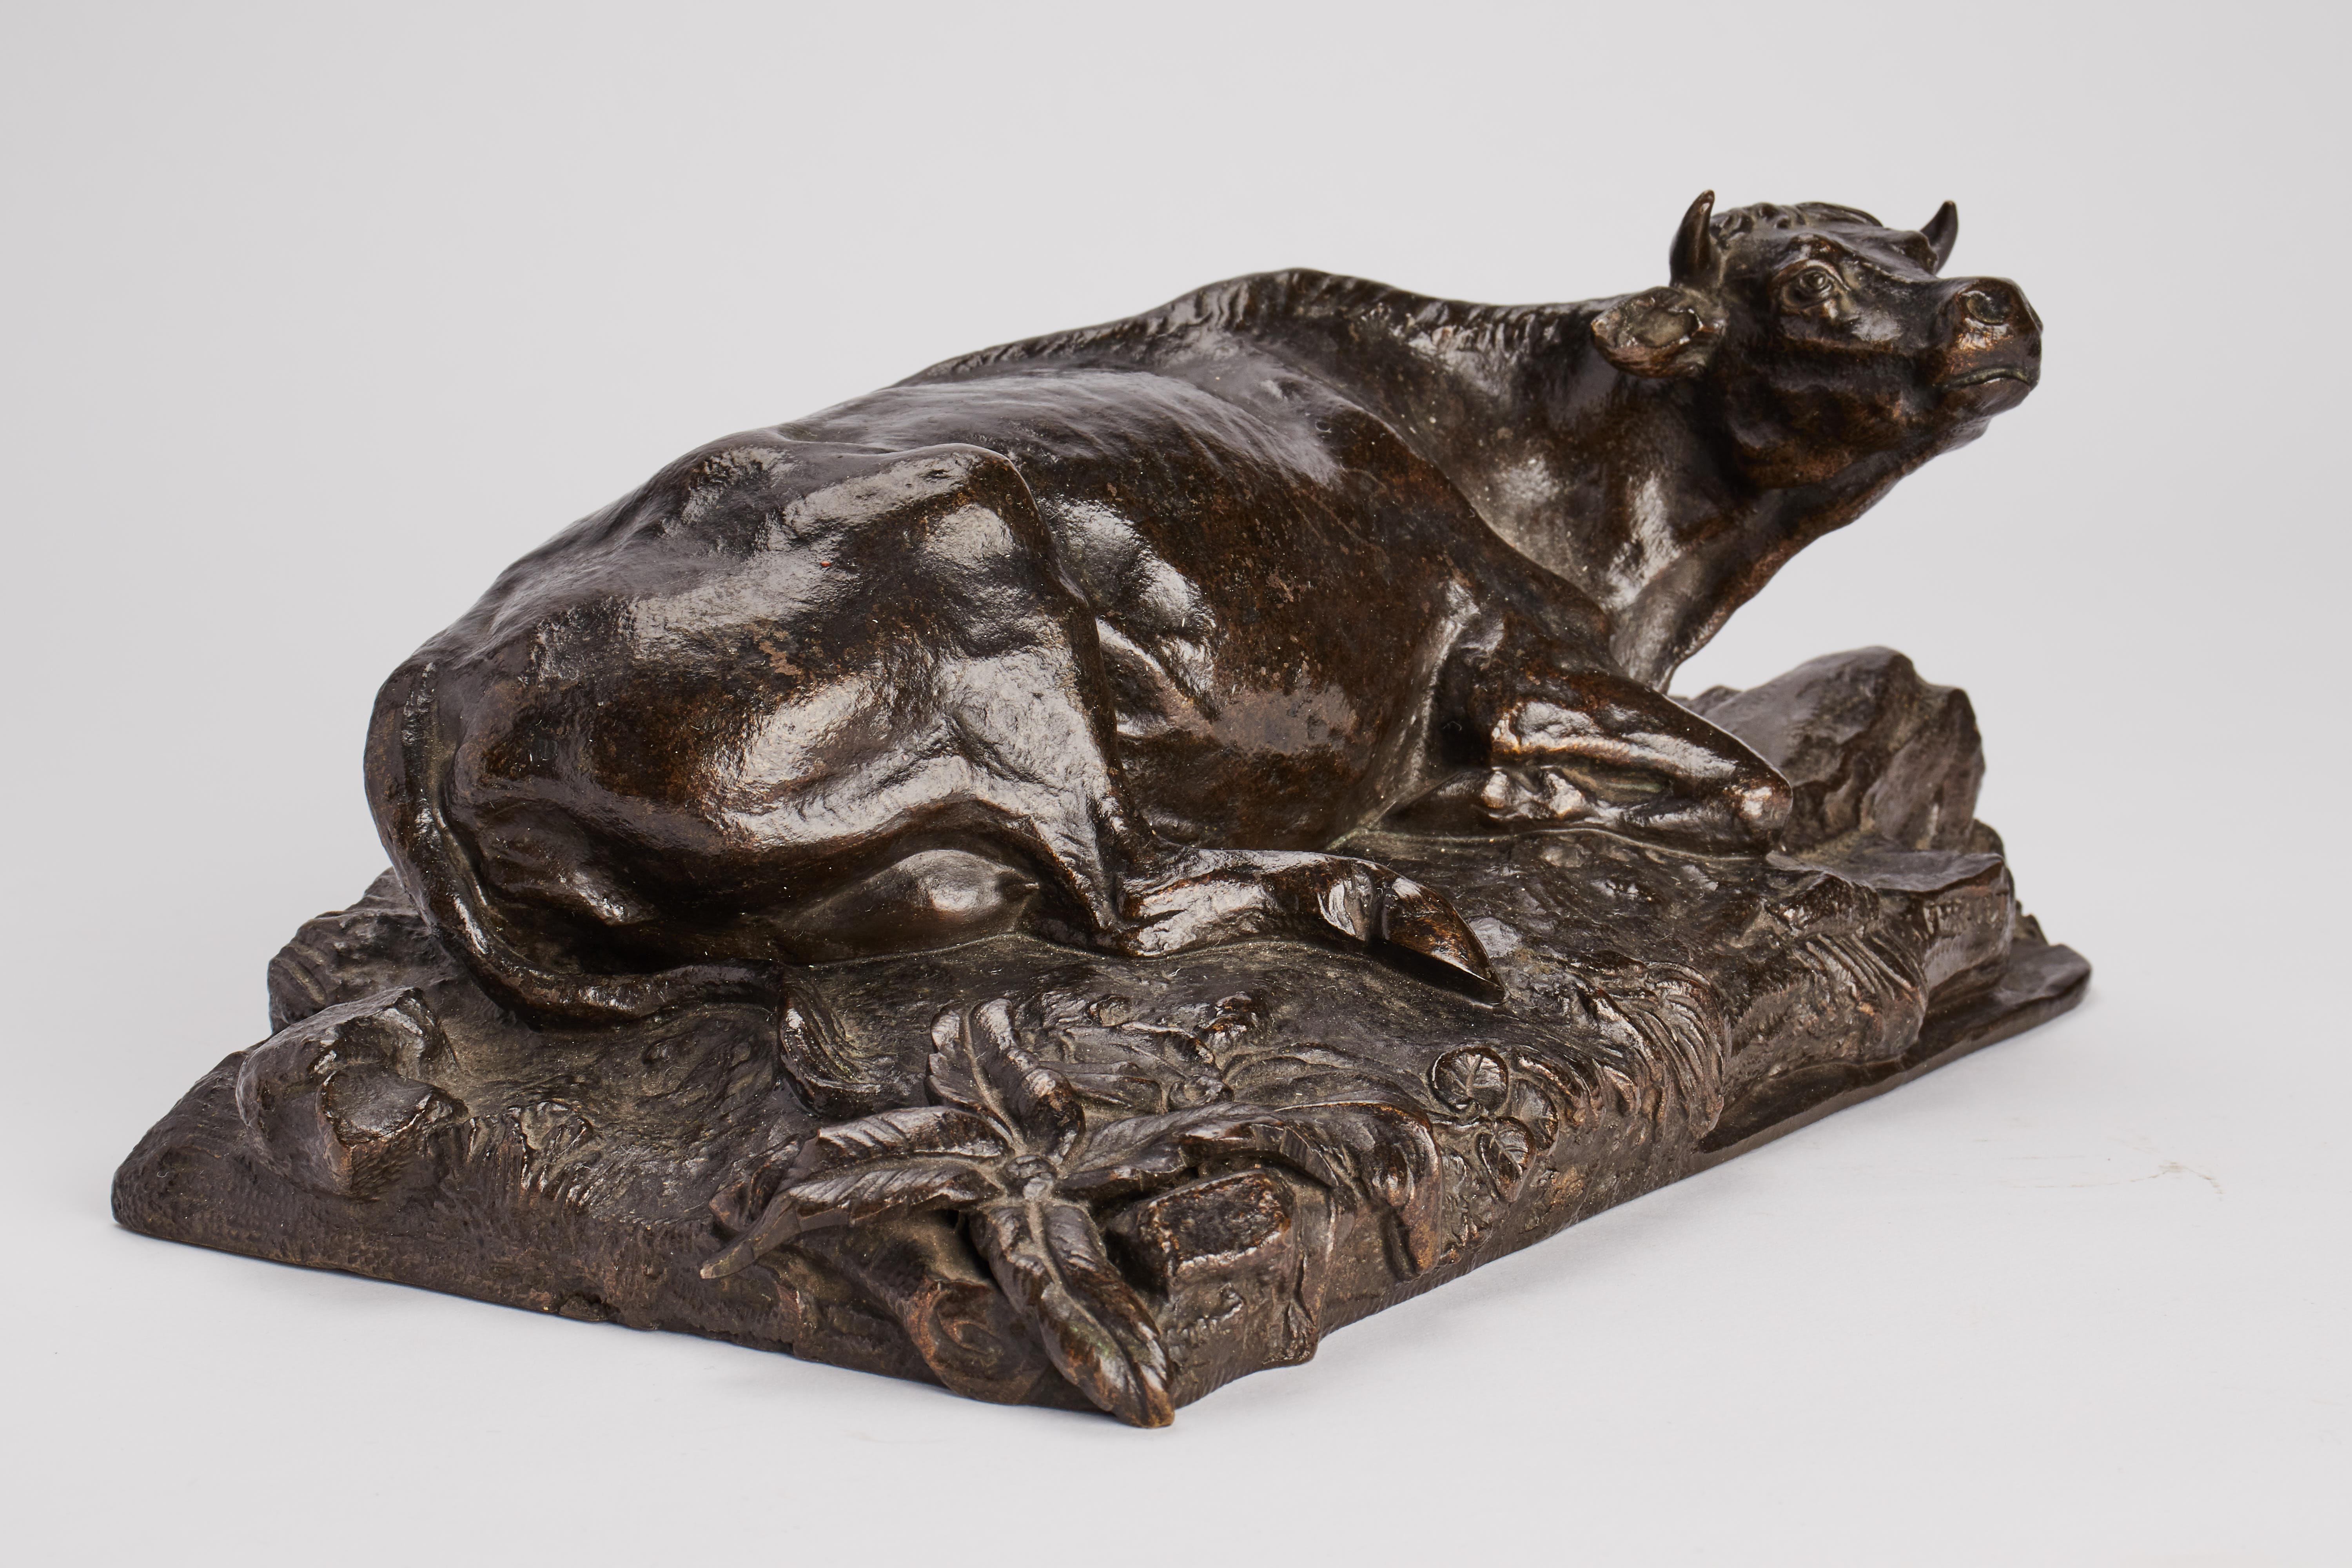 French Bronze Sculpture of a Cow Signed Fessart, France, circa 1870